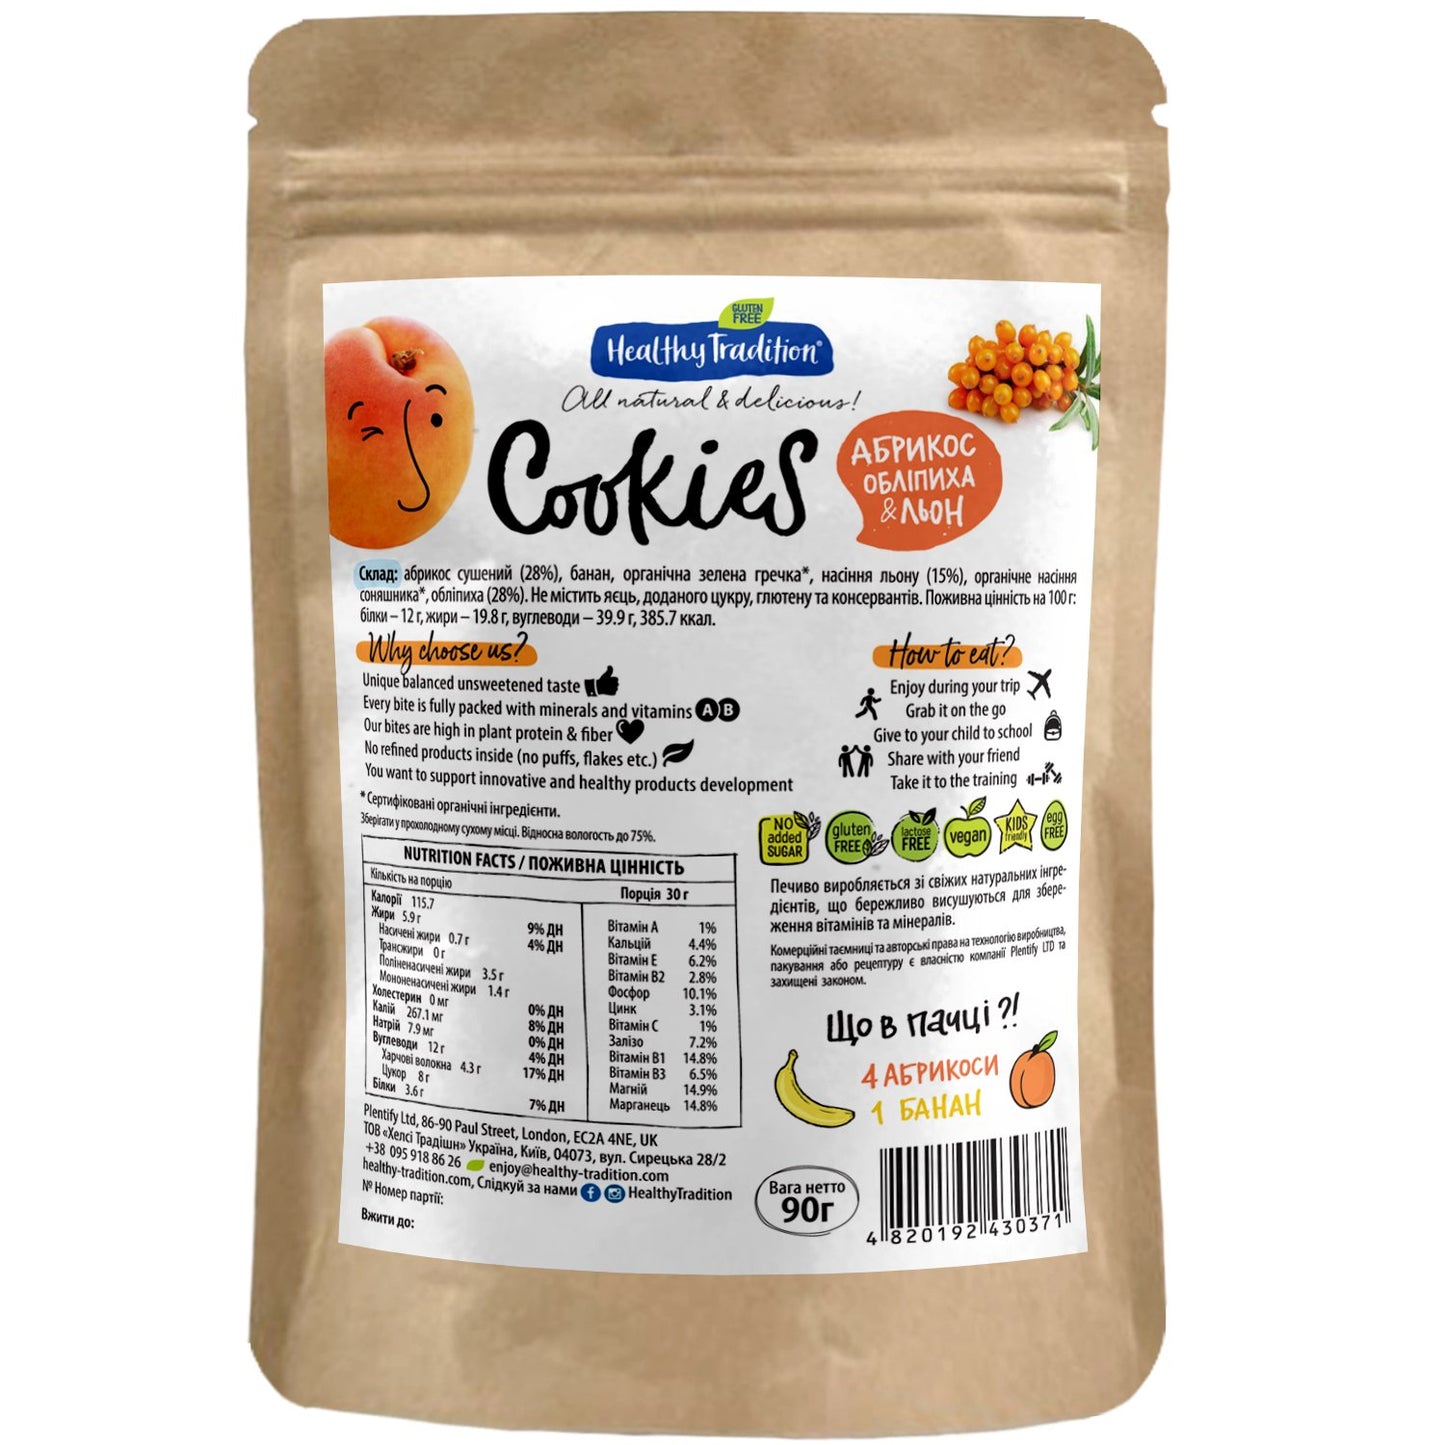 Dried cookies "Apricot and flax" gluten-free and sugar-free, 90g